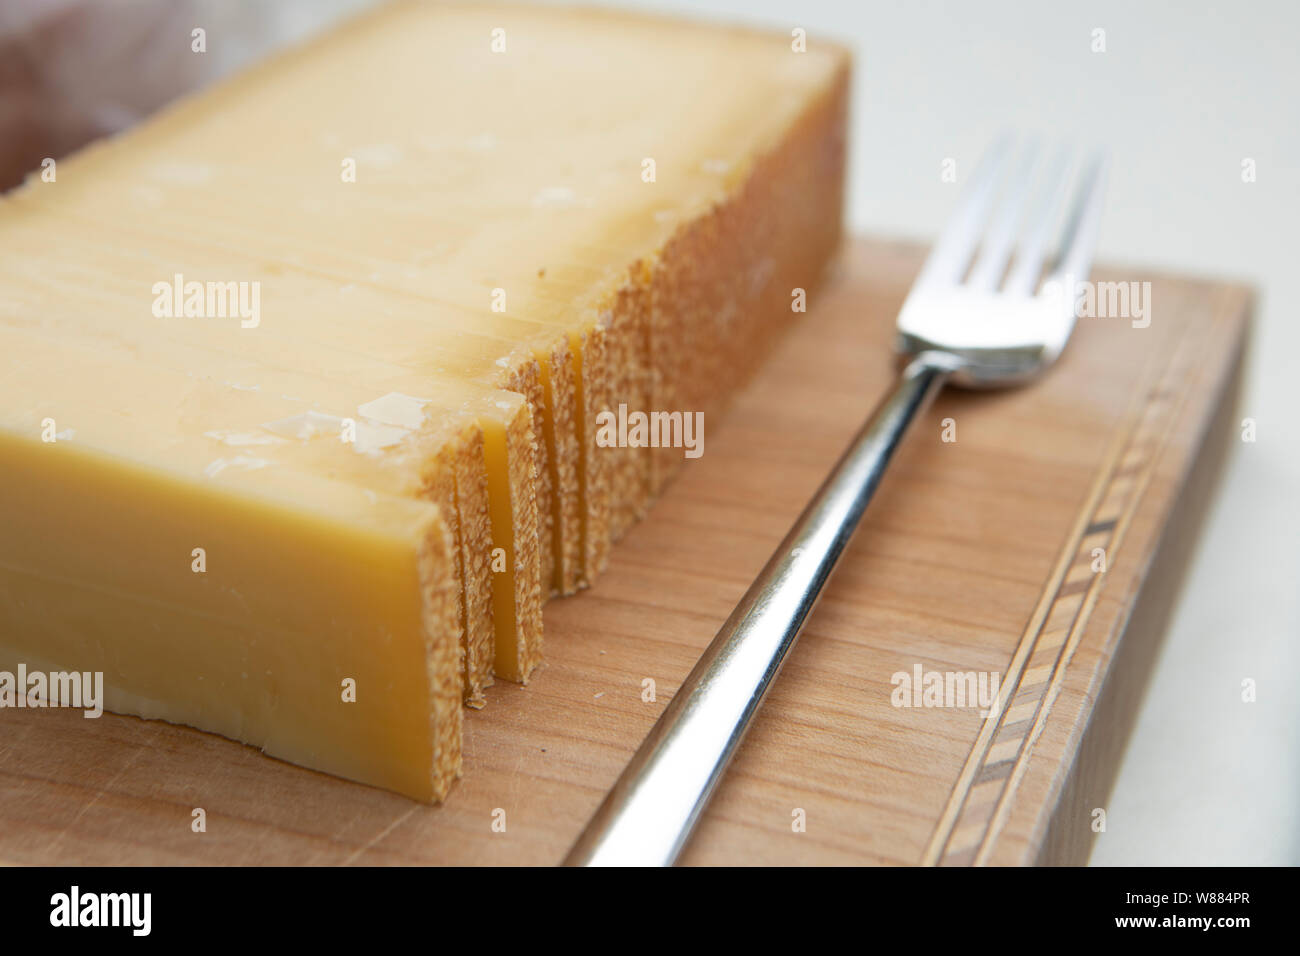 big slice of traditional Austrian hard cheese with rind on a wooden plate with a fork Stock Photo